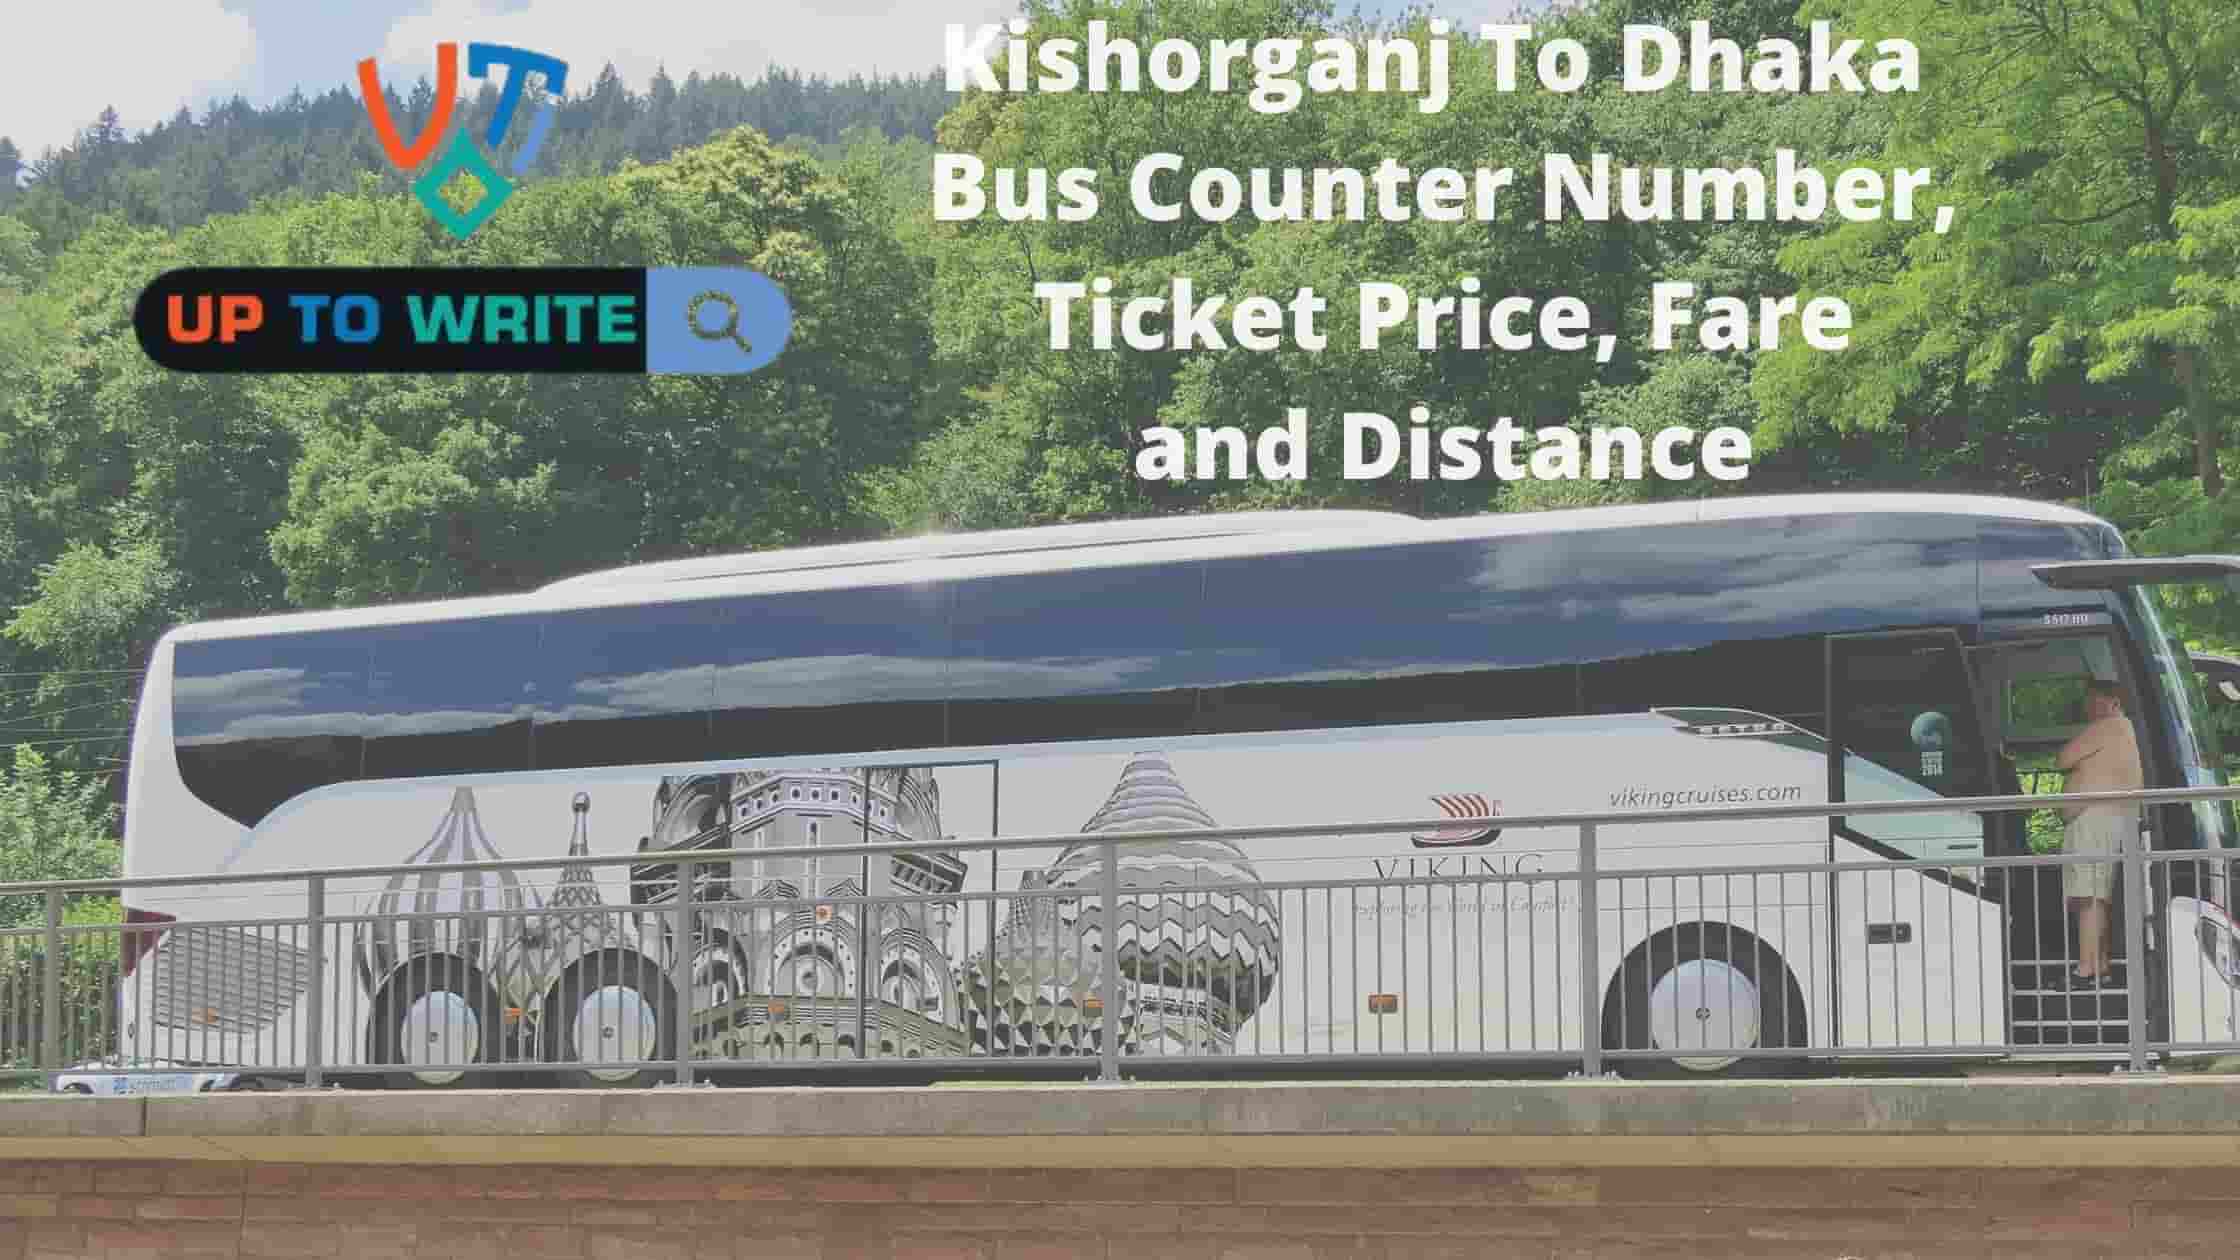 Kishorganj To Dhaka Bus Counter Number, Ticket Price, Fare and Distance (1)